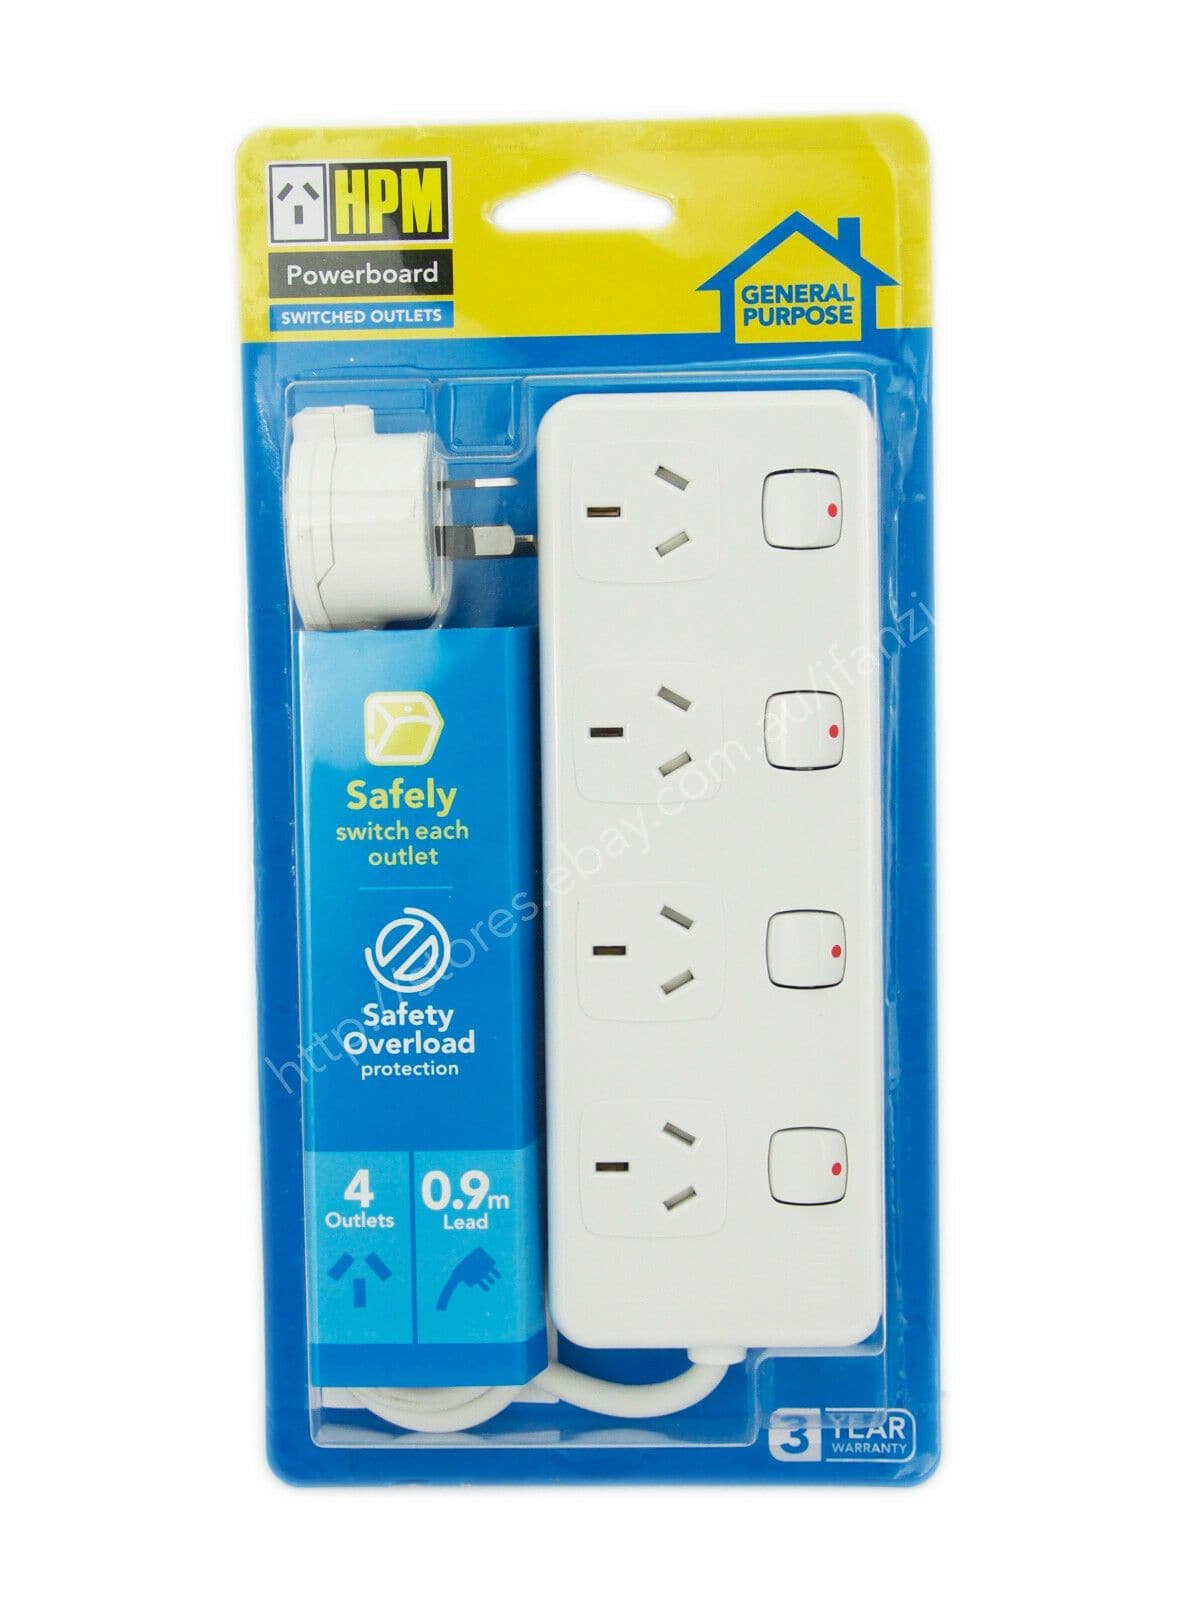 HPM 0.9m 4 Switched Outlets Powerboard With Safety Overload Protection D104WE - Double Bay Hardware